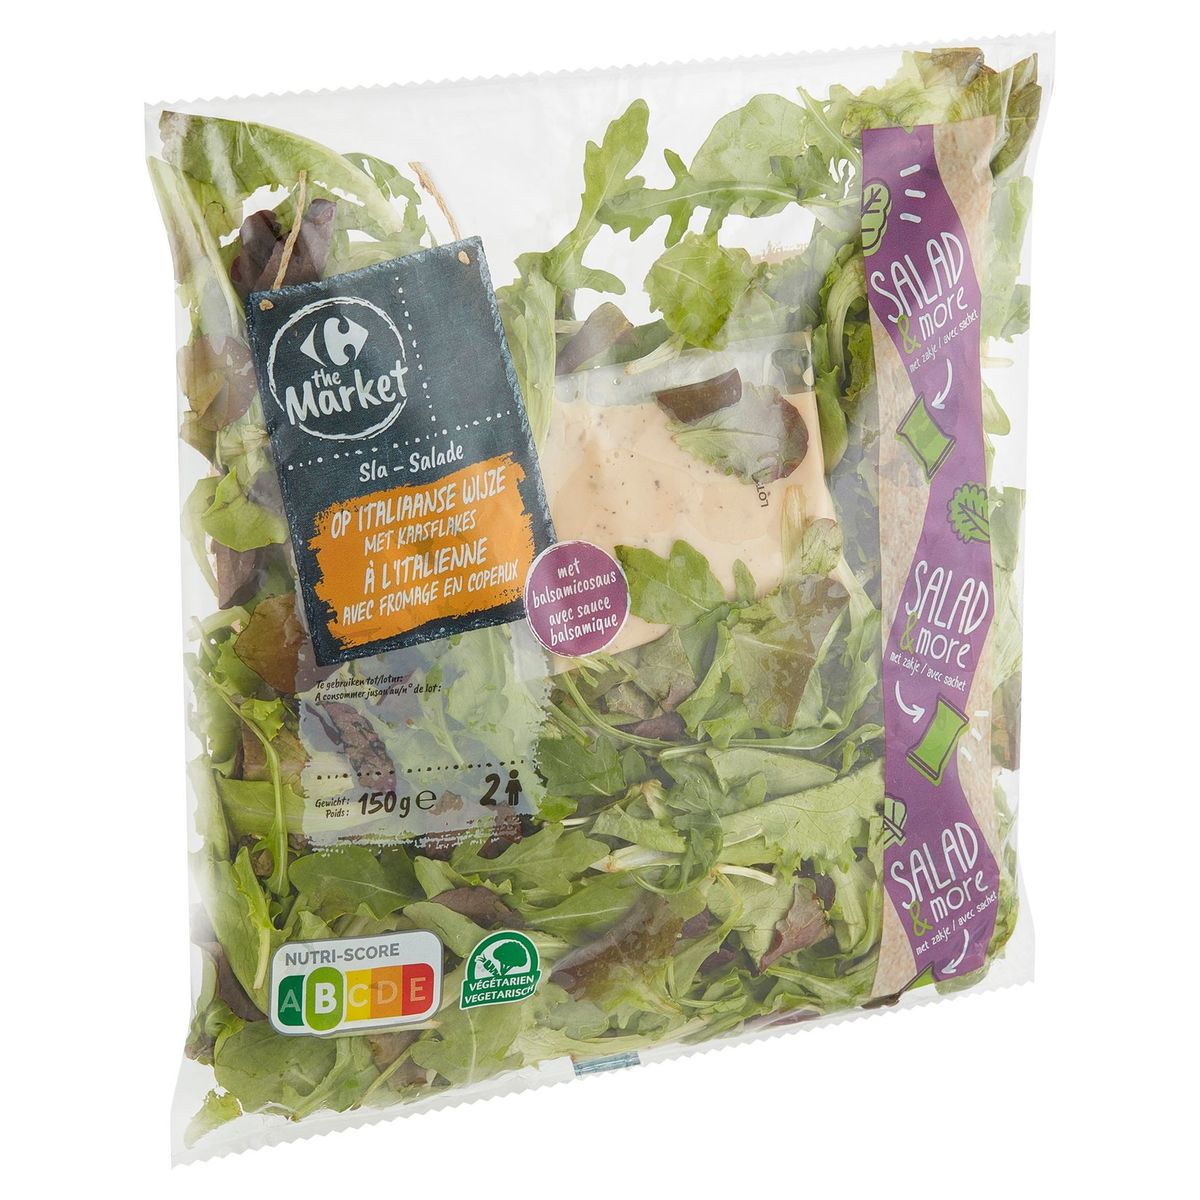 Carrefour The Market Salade Italienne avec Fromage Copeuax 150 g